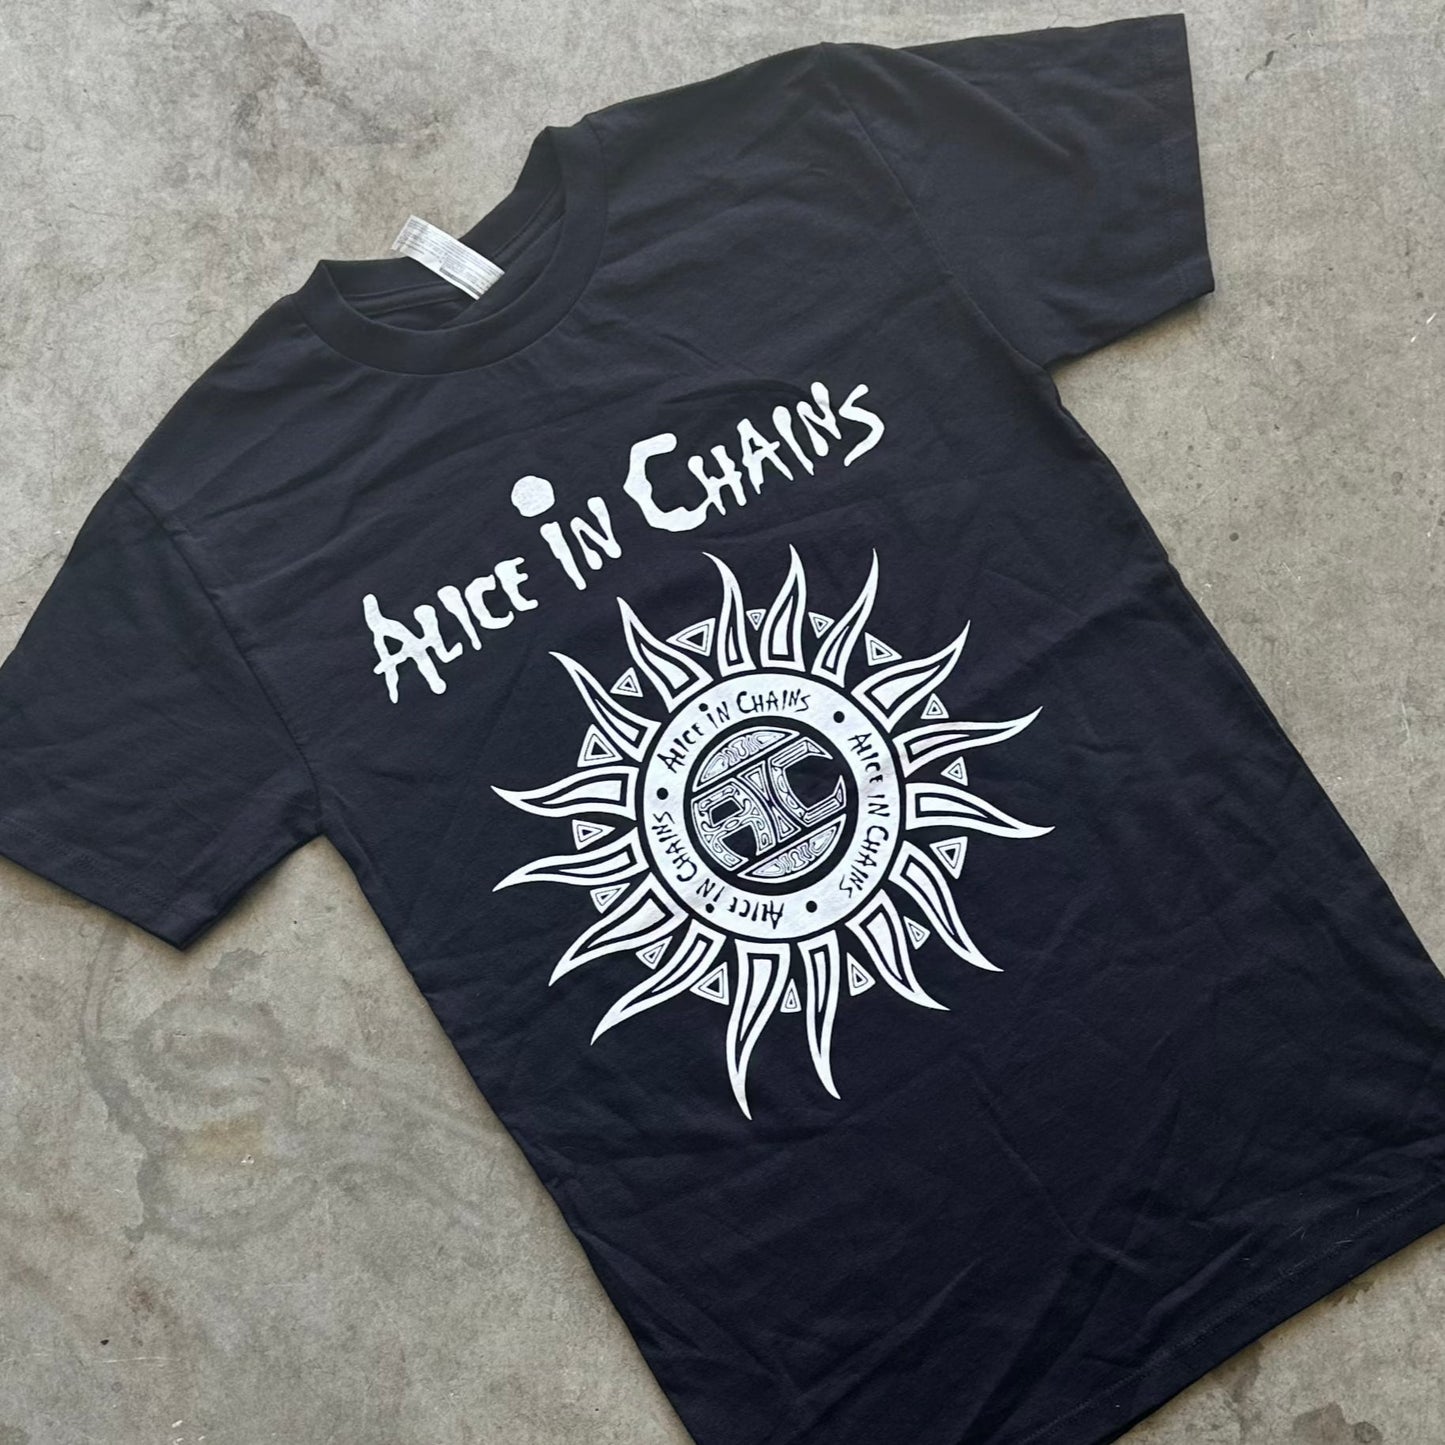 Alice in Chains Tee